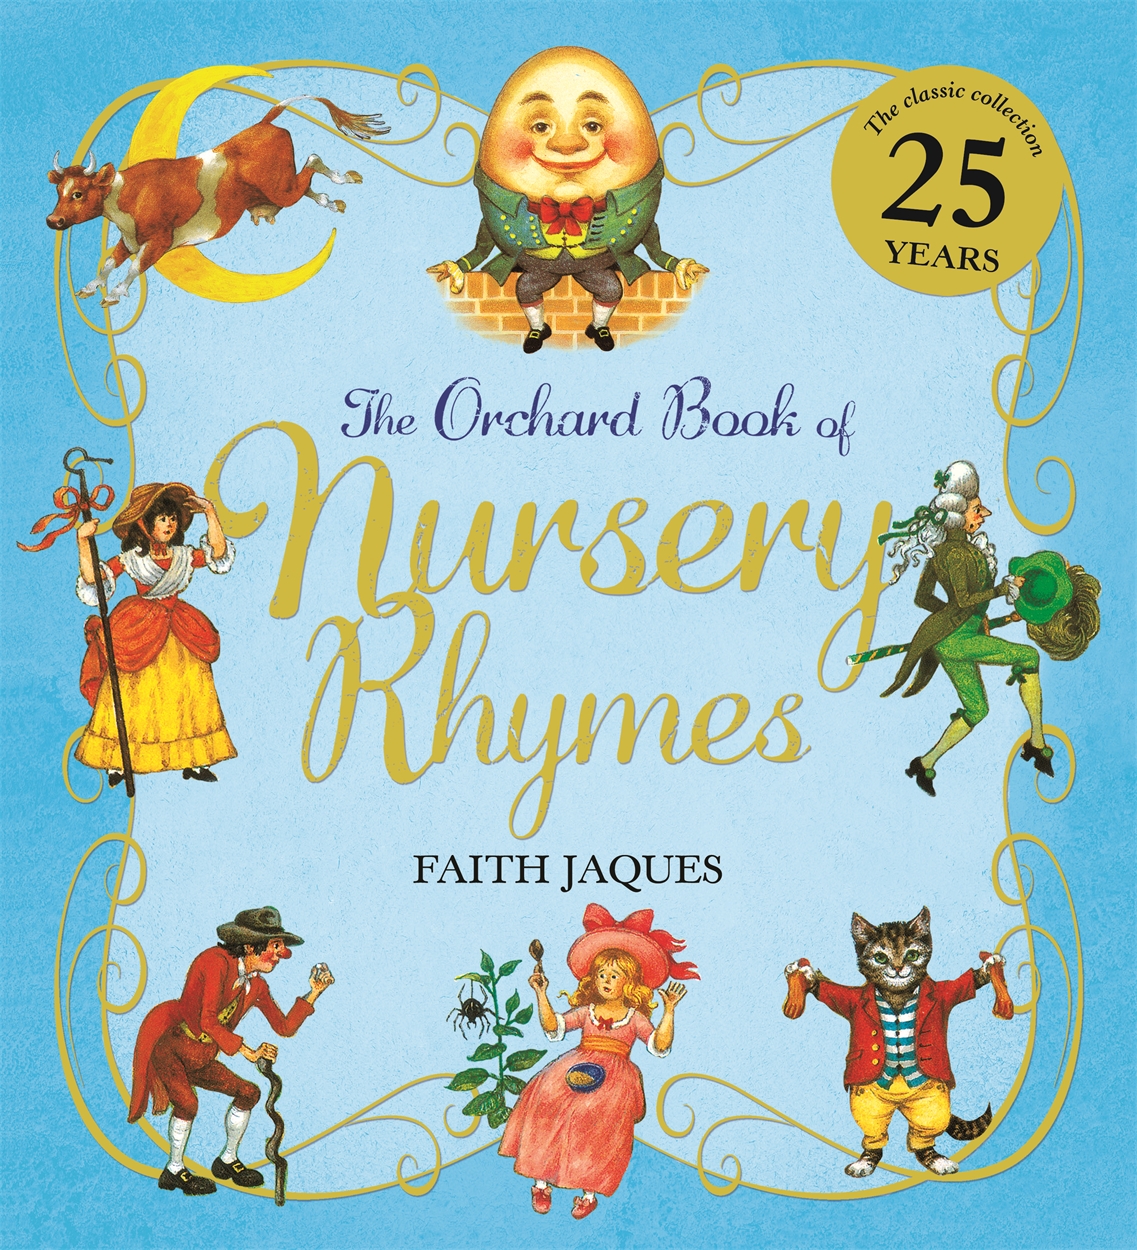 The Orchard Book of Nursery Rhymes by Zena Sutherland | Hachette UK